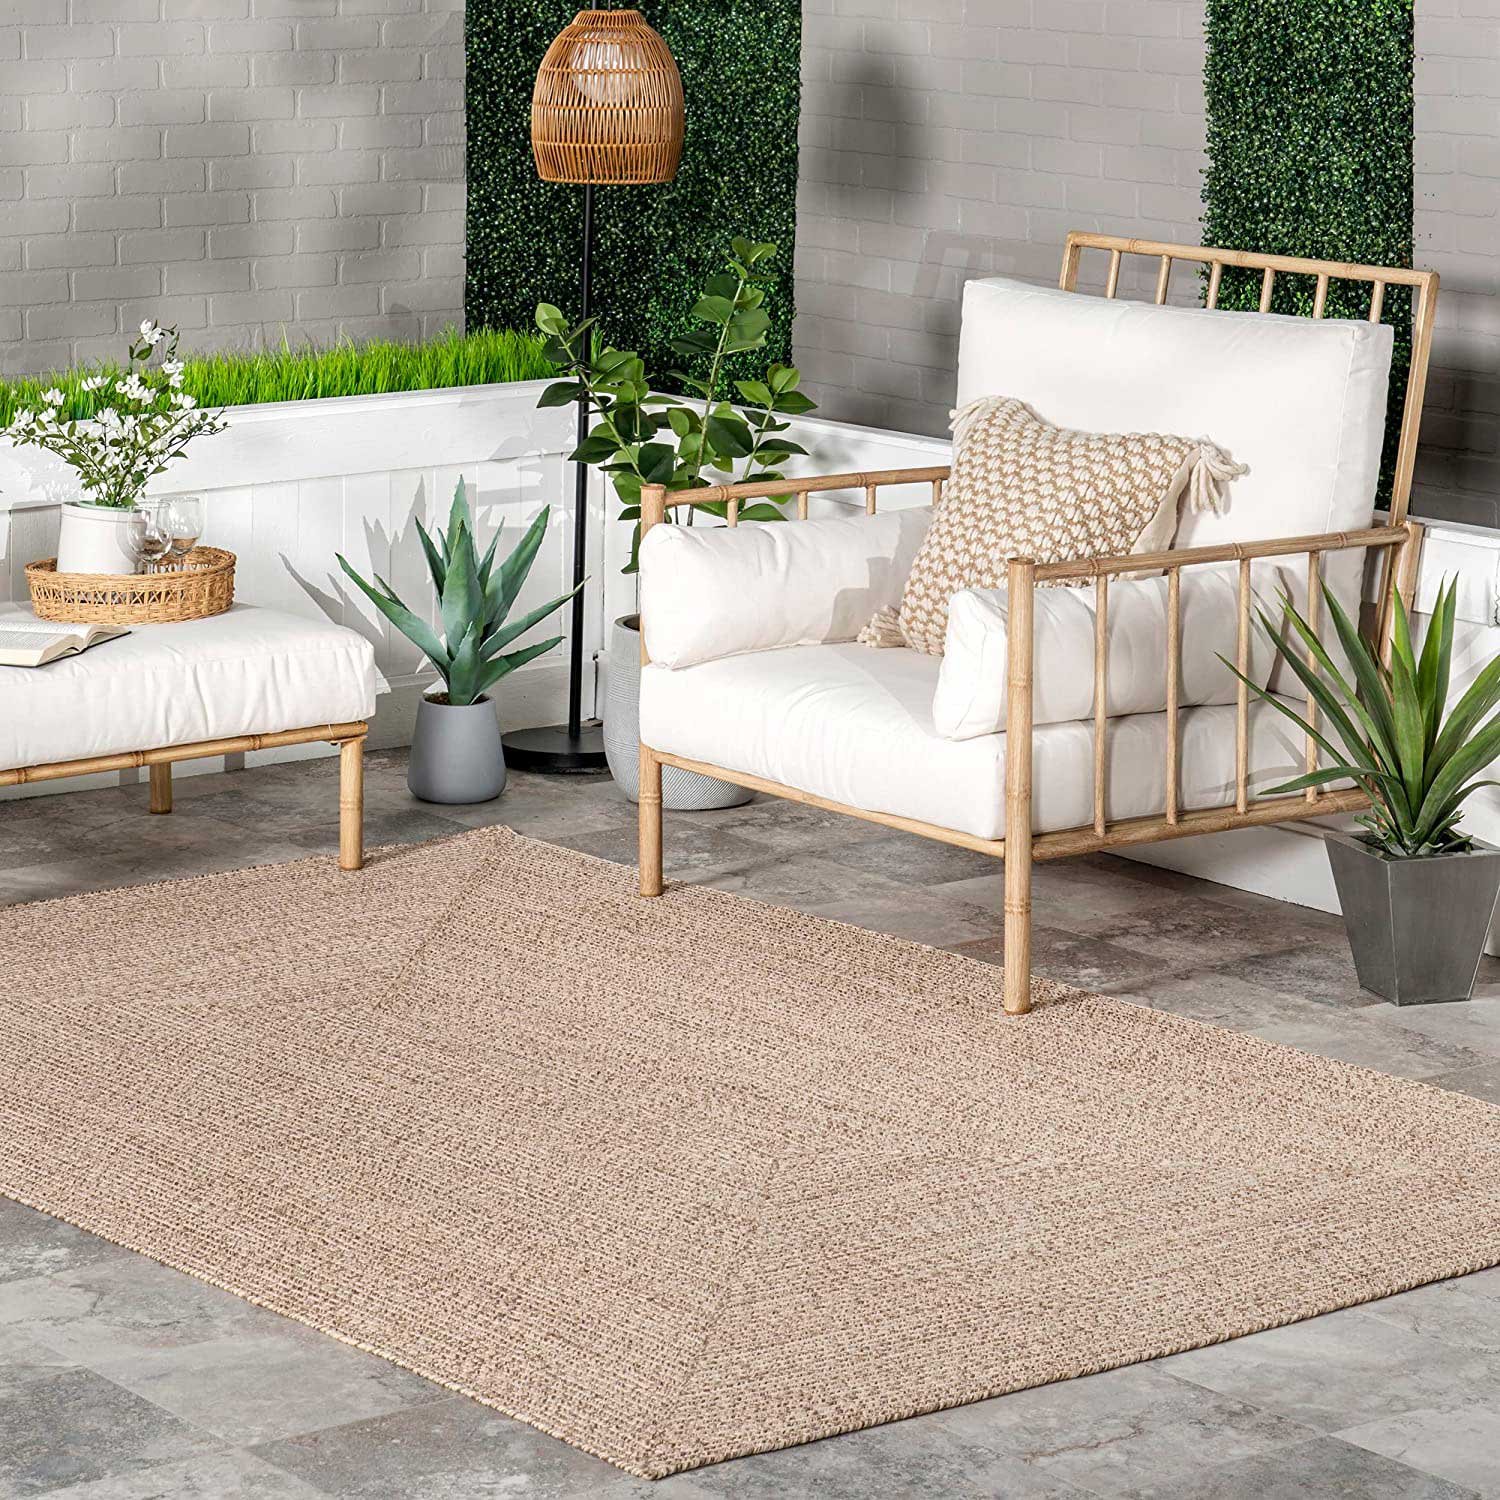 Braided Outdoor Rug